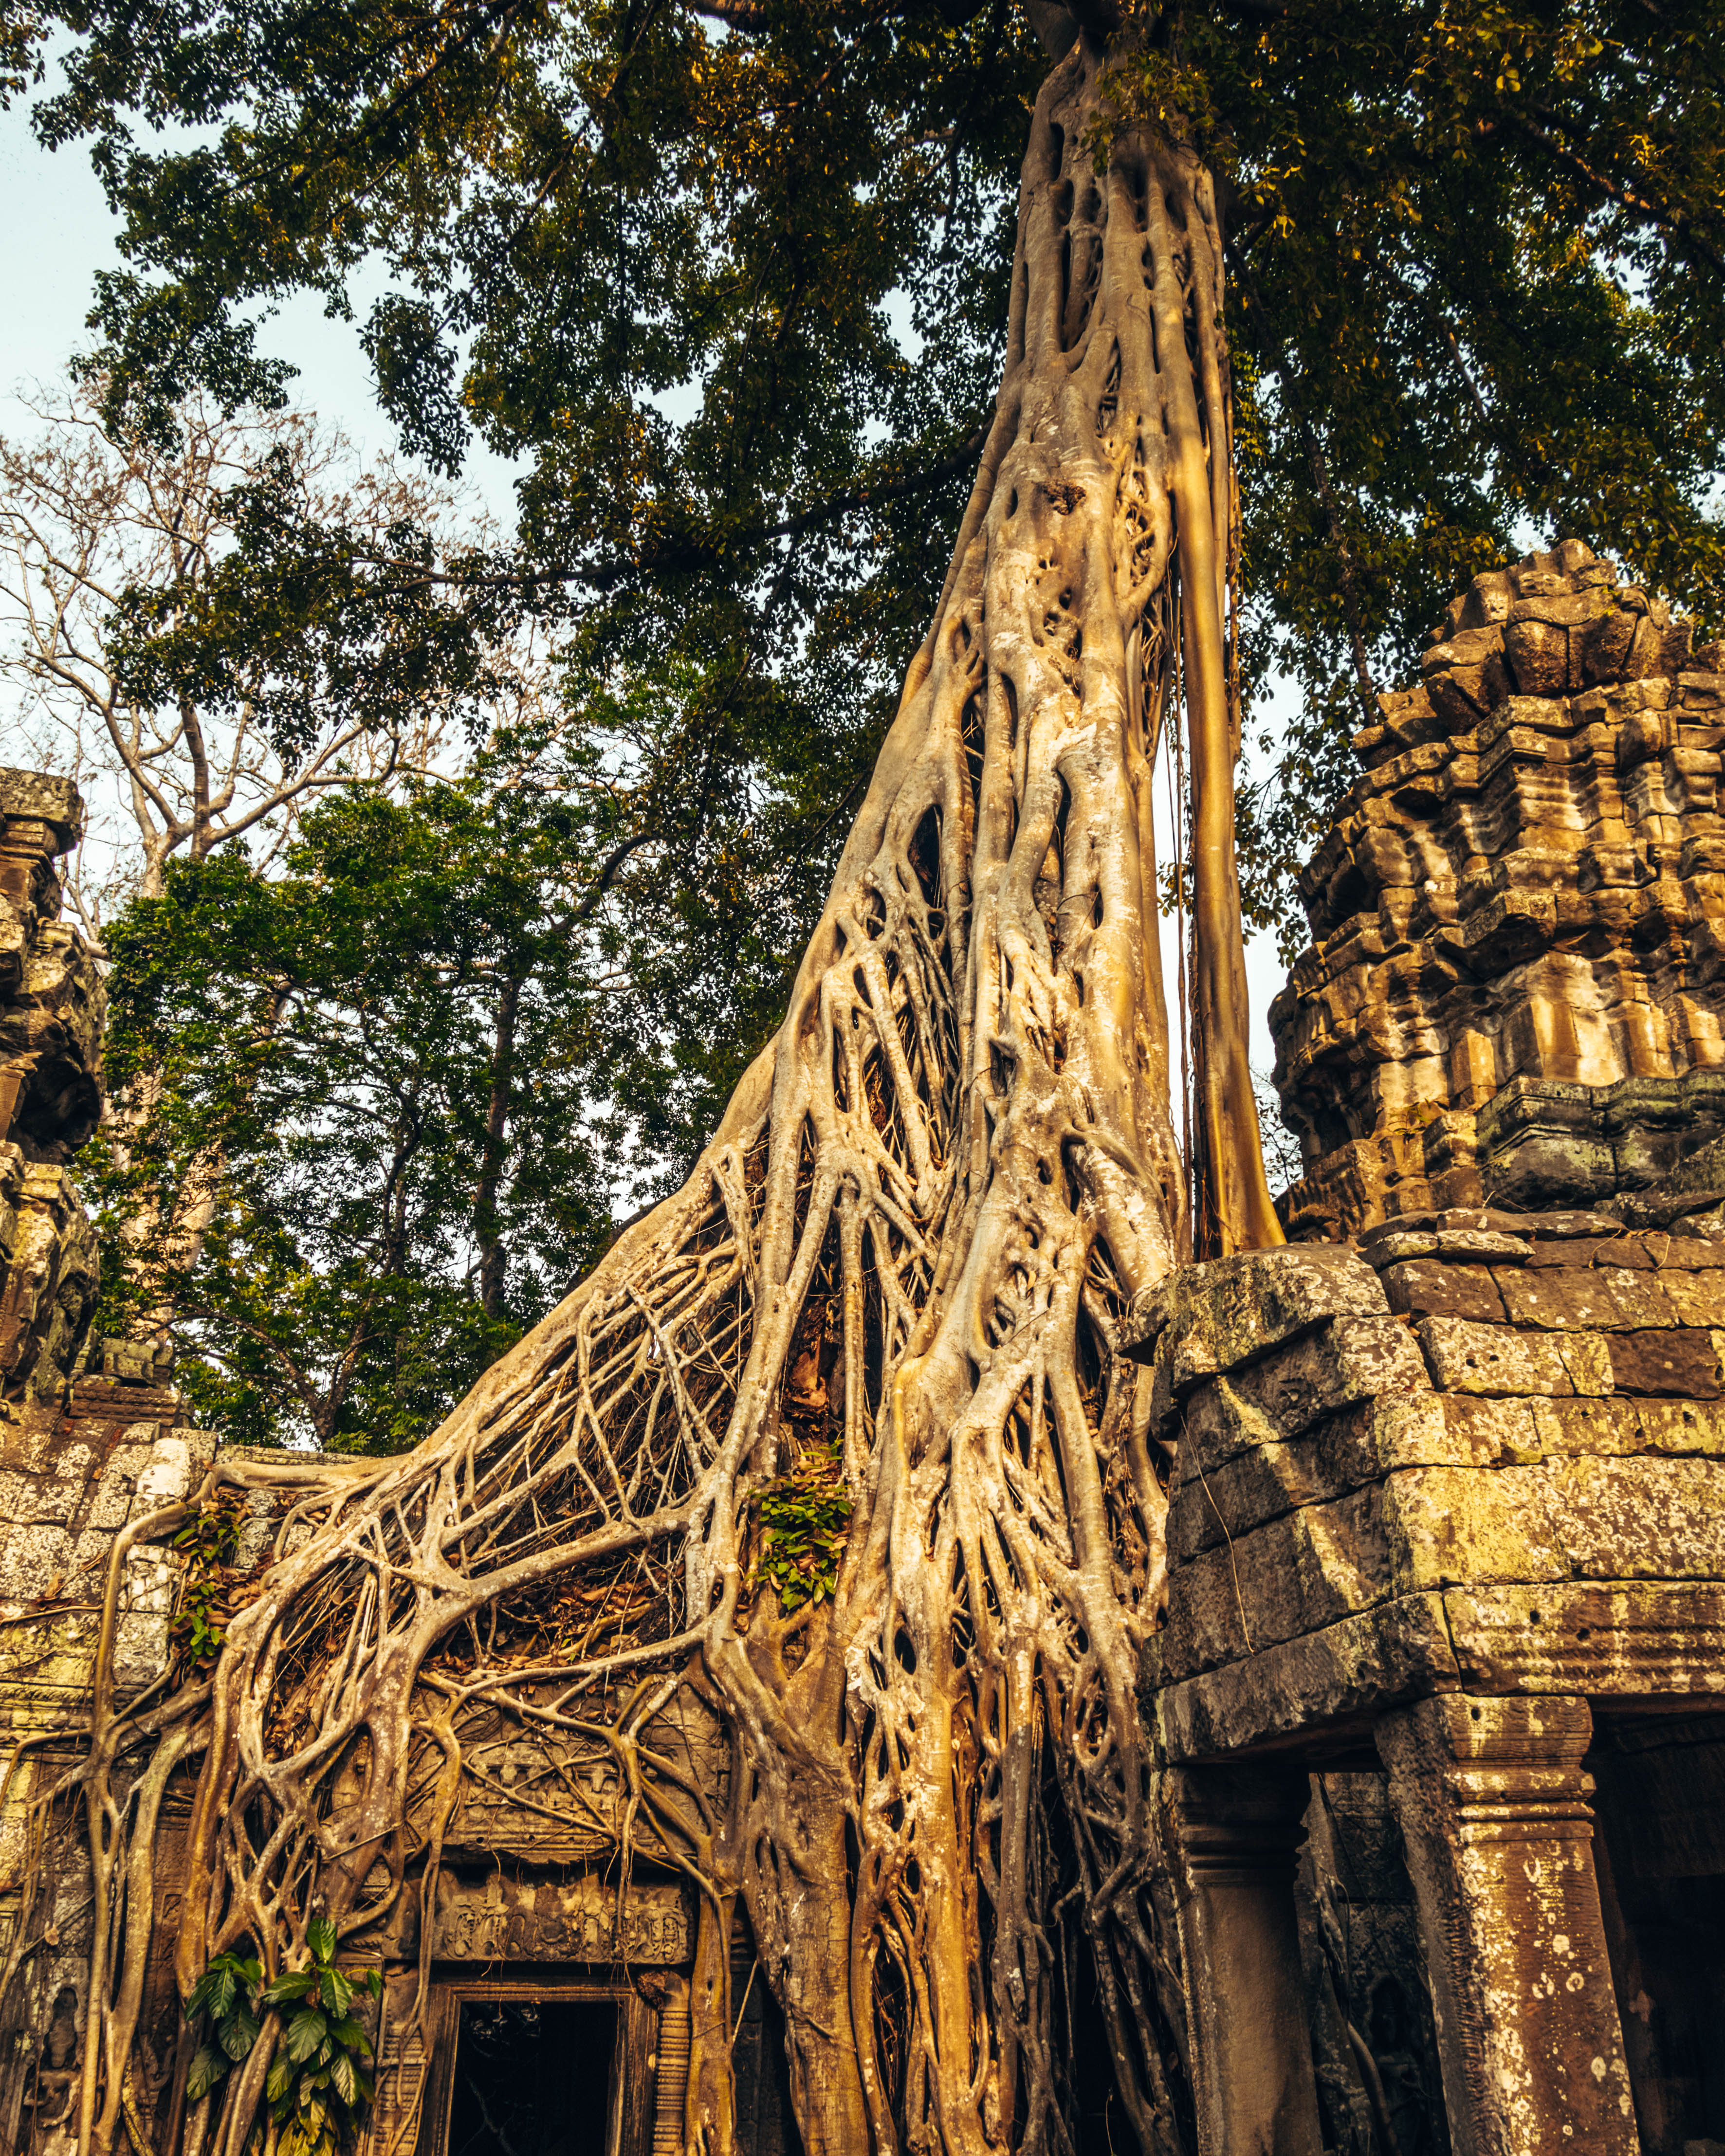 One of the many trees growing out of Ta Prohm, Angkor Wat temples - WeDiditOurWay.com